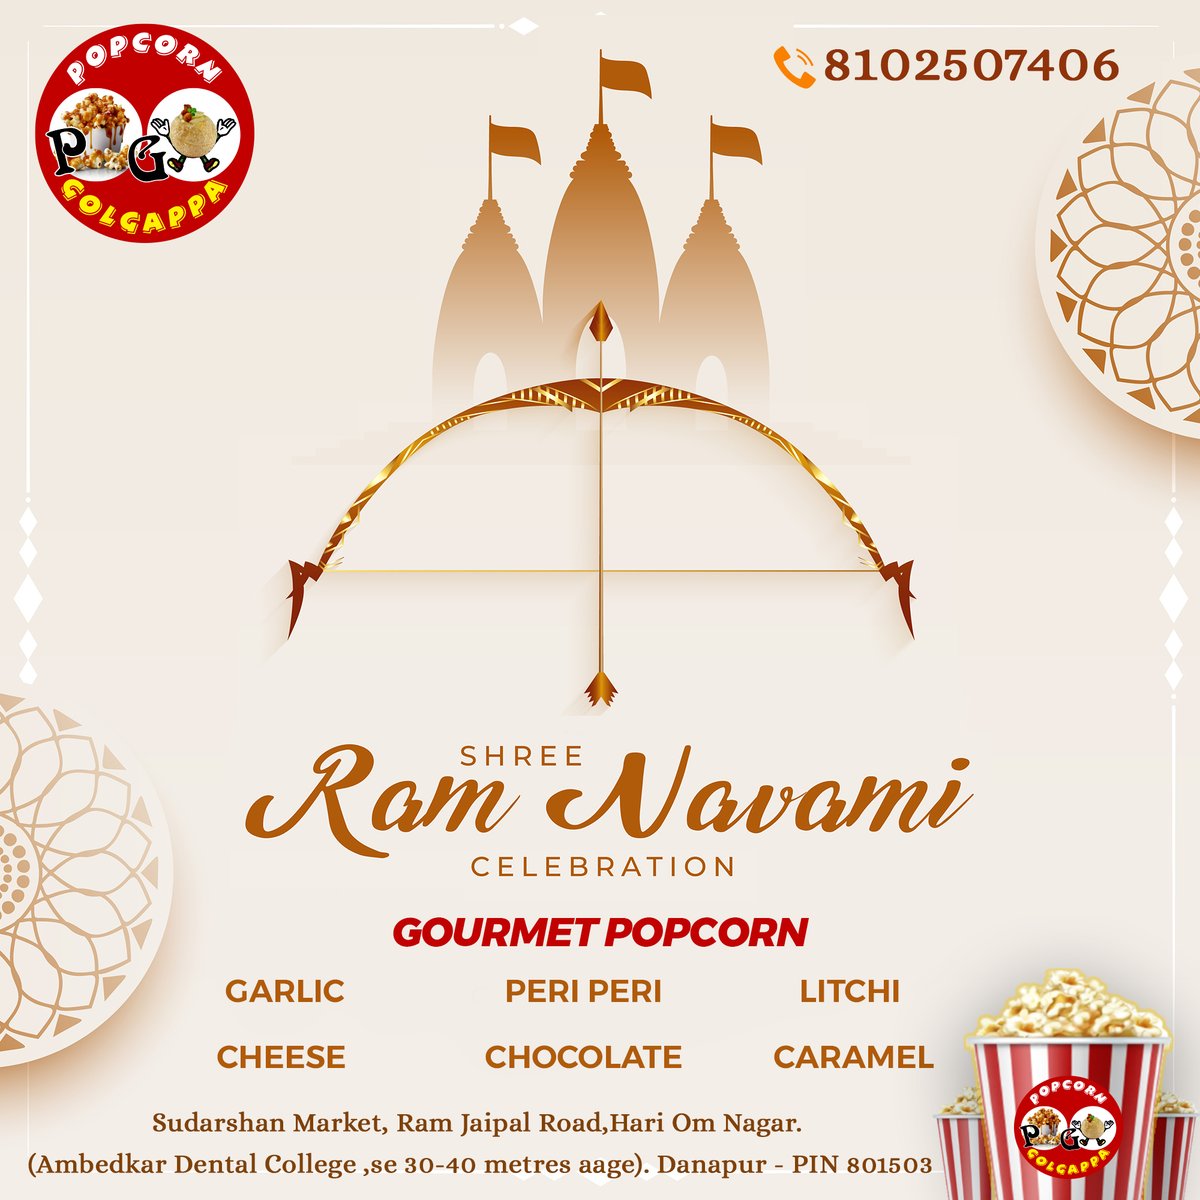 'Pogo Cafe wishes you a joyful Ram Navmi! Indulge in the flavors of celebration with our delicious popcorn varieties and mouthwatering fast food like burgers and golgappas. #RamNavmi #PogoCafe #PopcornFlavors #Burgers #Golgappa #FoodieDelights #FestiveFeast'